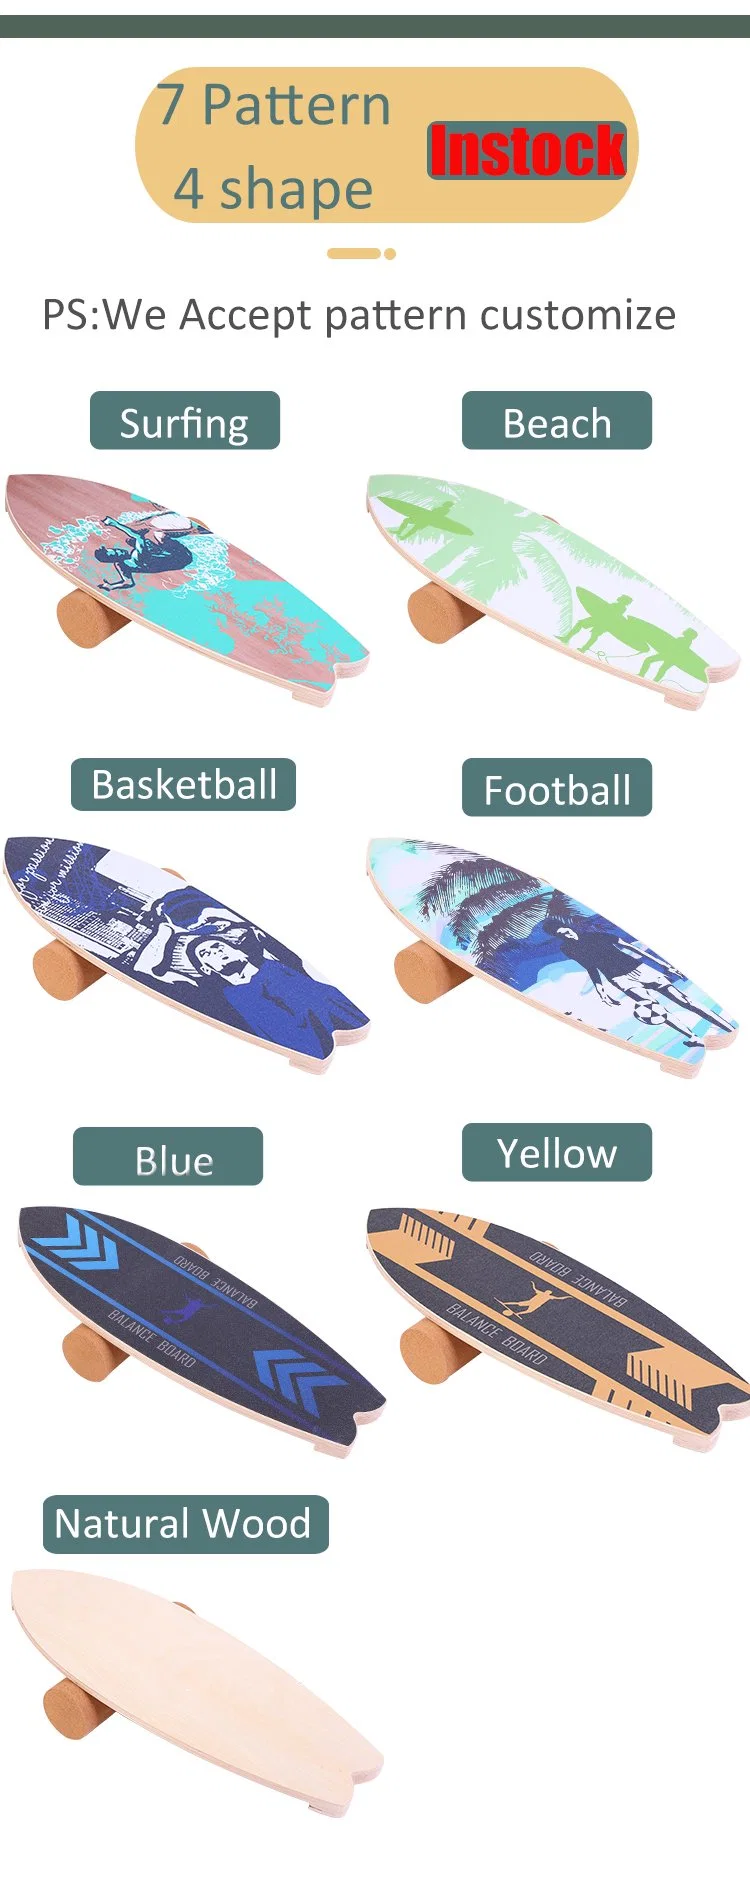 Wooden Balancing Board with Cock Roller to Exercise and Build Core Stability Training for Juggling Yoga Surfing Ski Skateboard Hockey Soccor